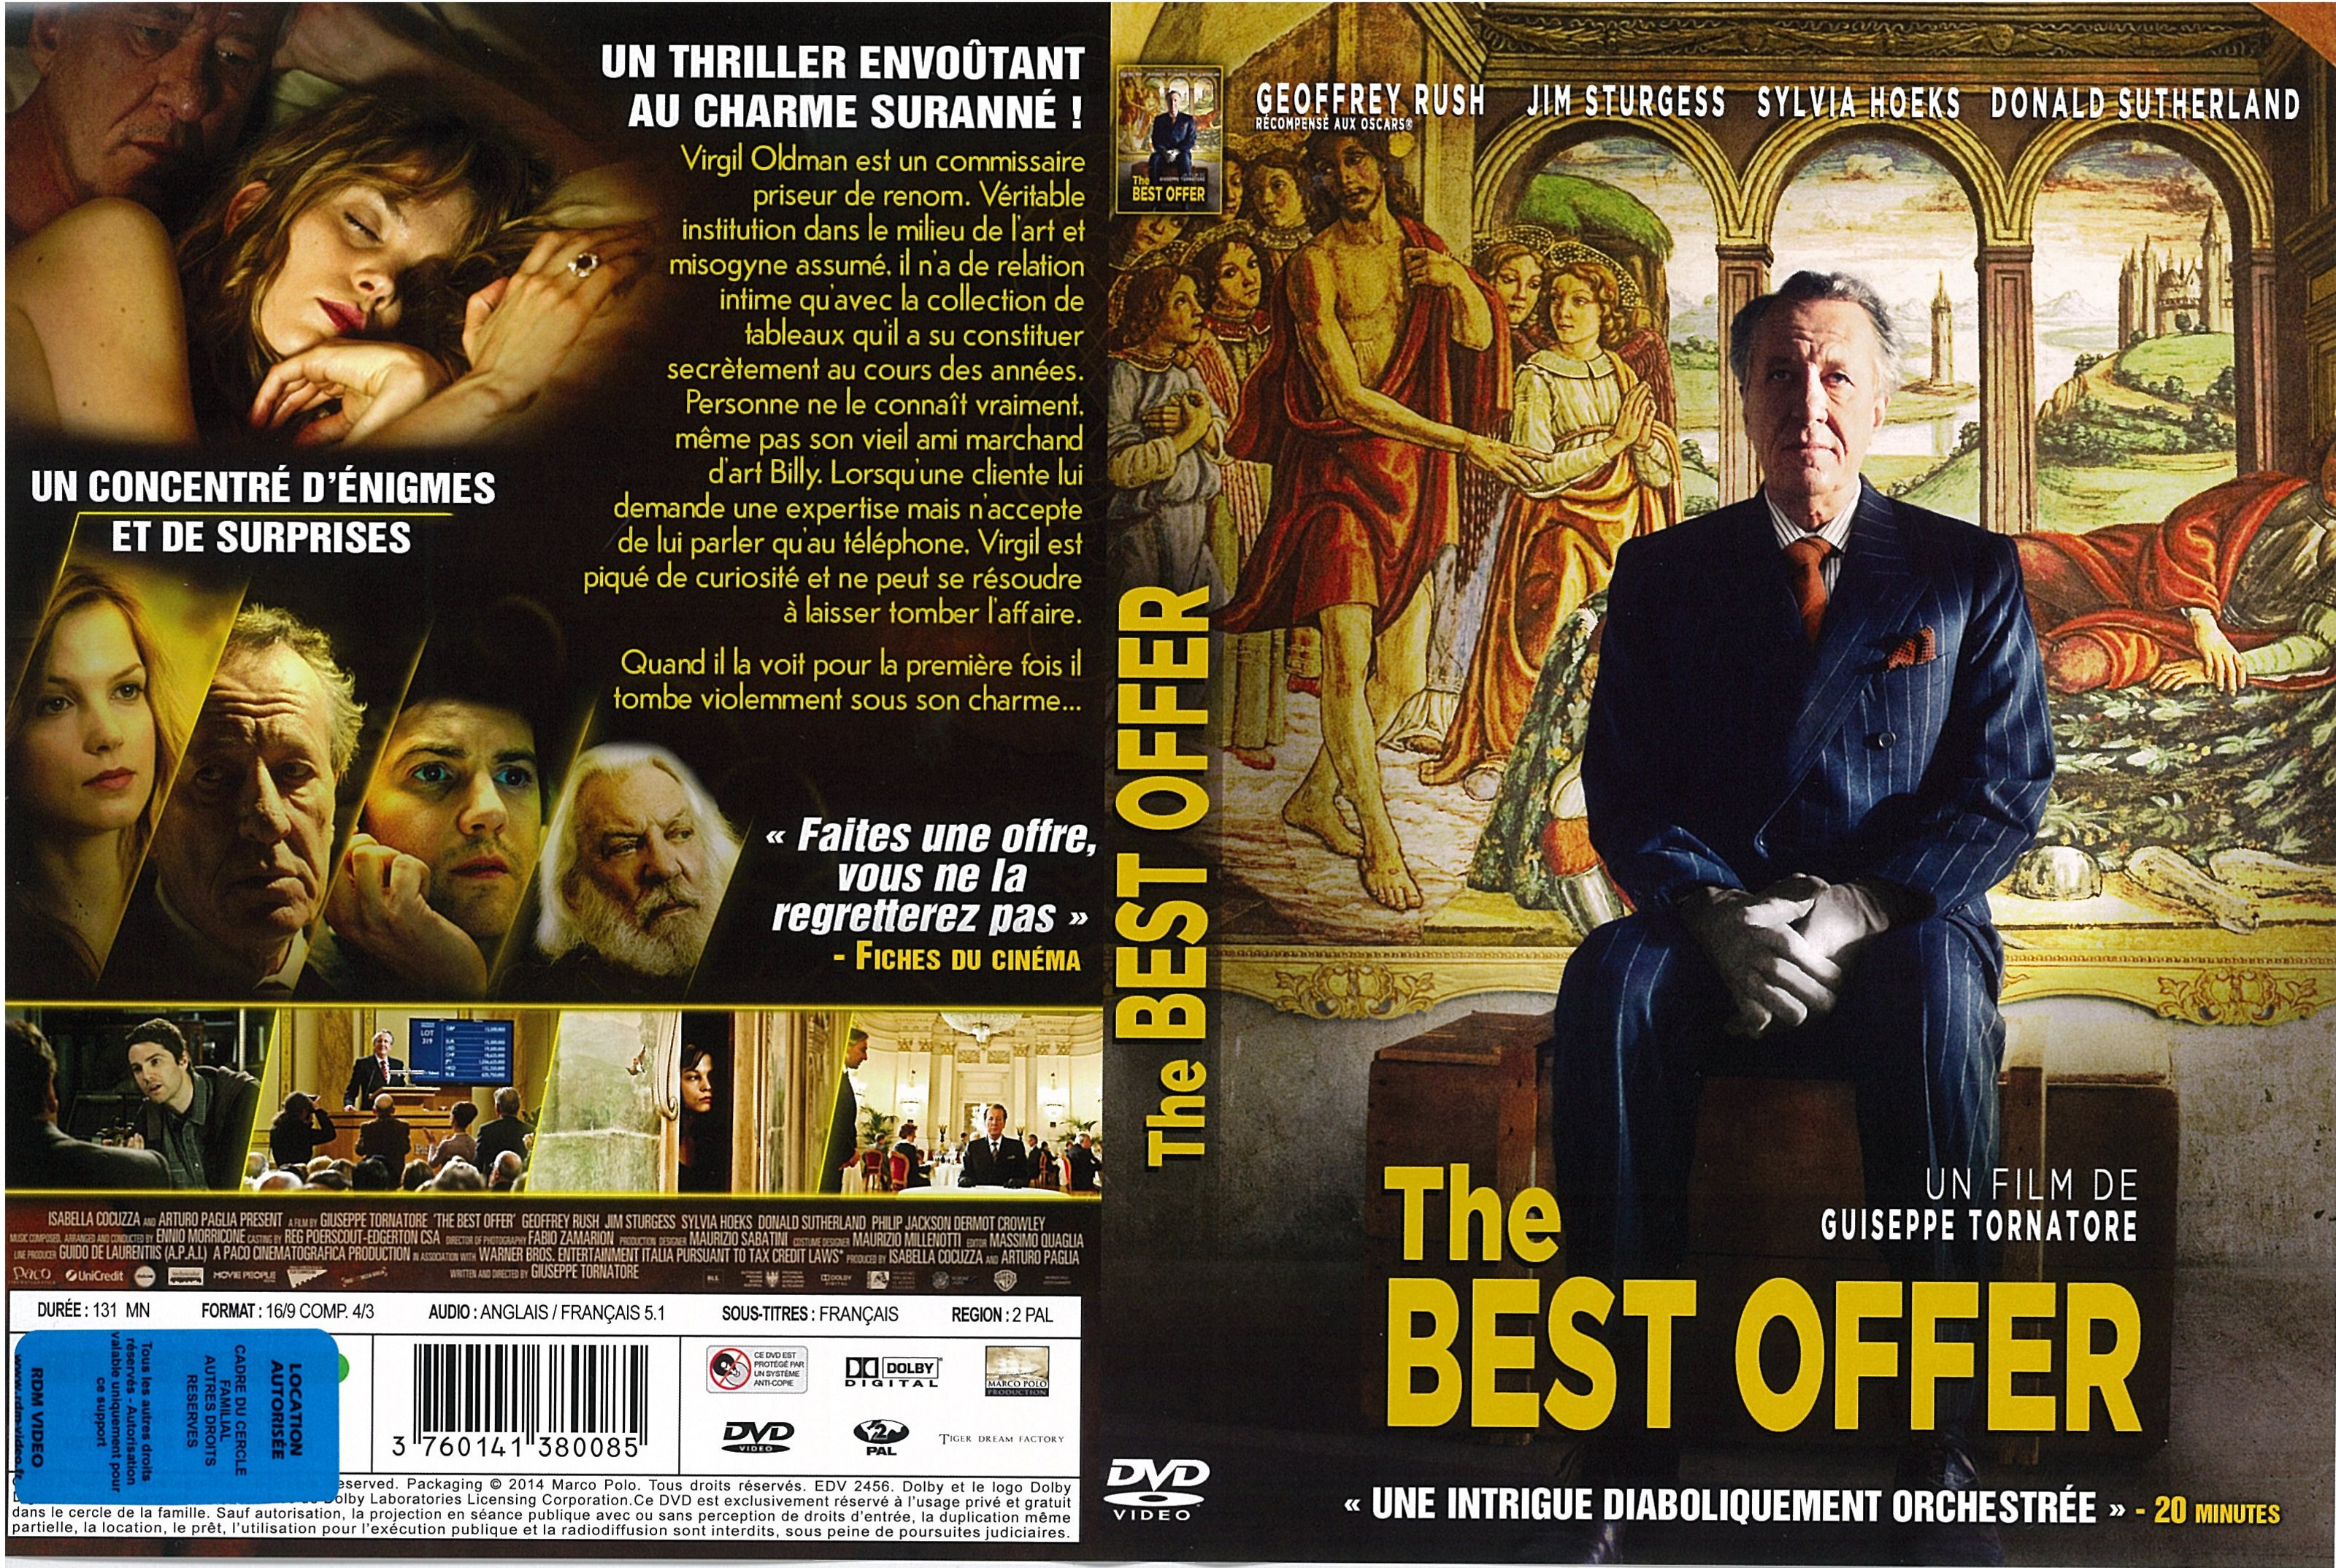 Jaquette DVD The Best Offer